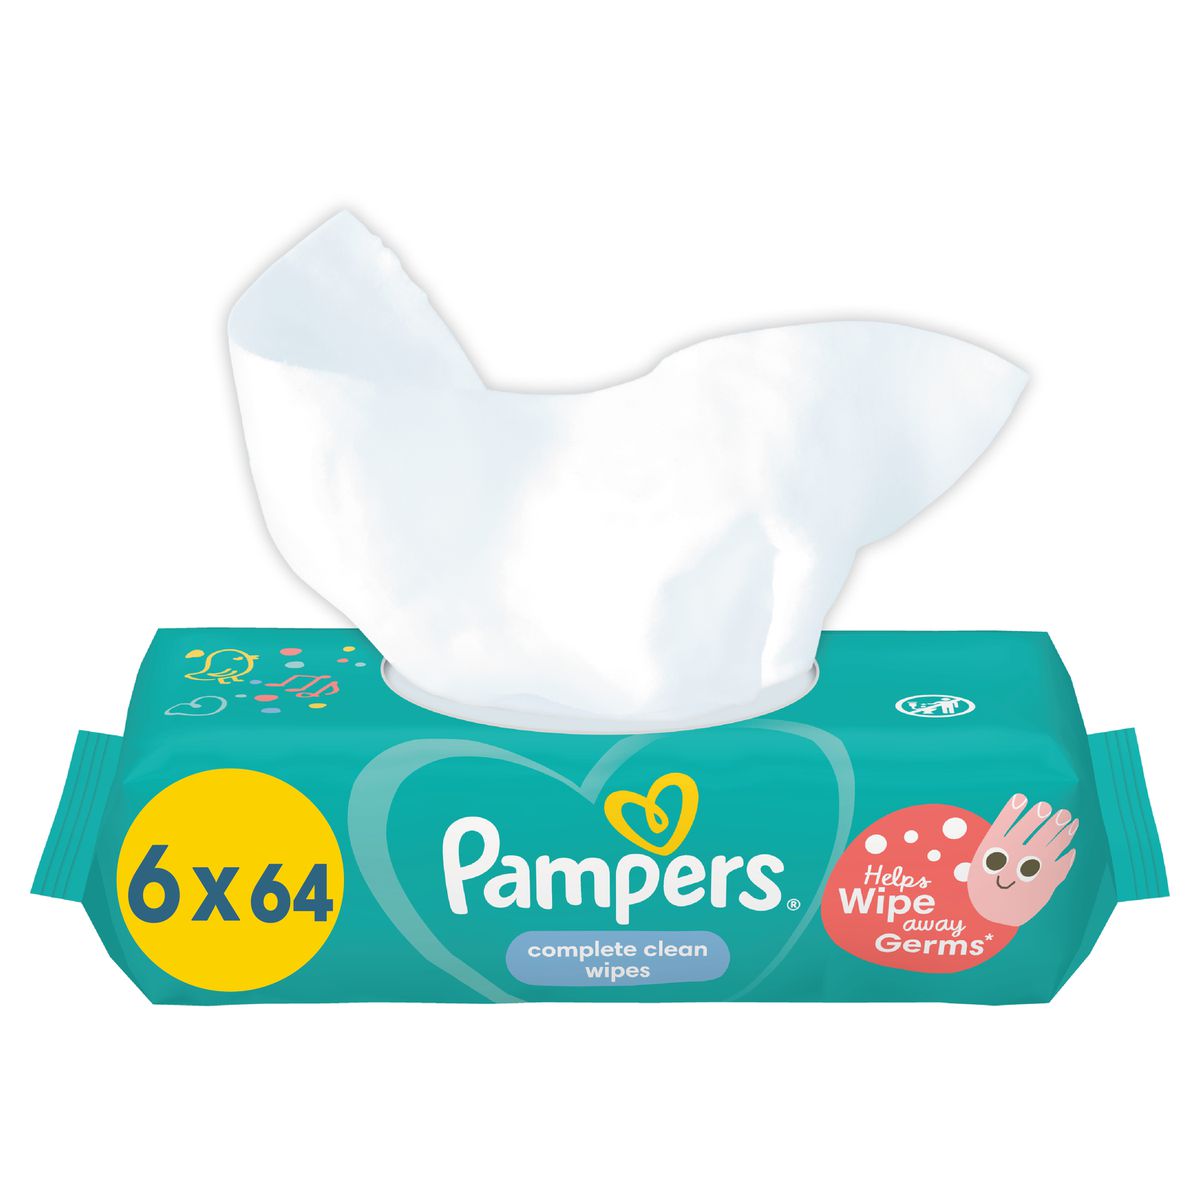 Pampers Complete Clean Wipes - 384 (6x64) Baby Wipes